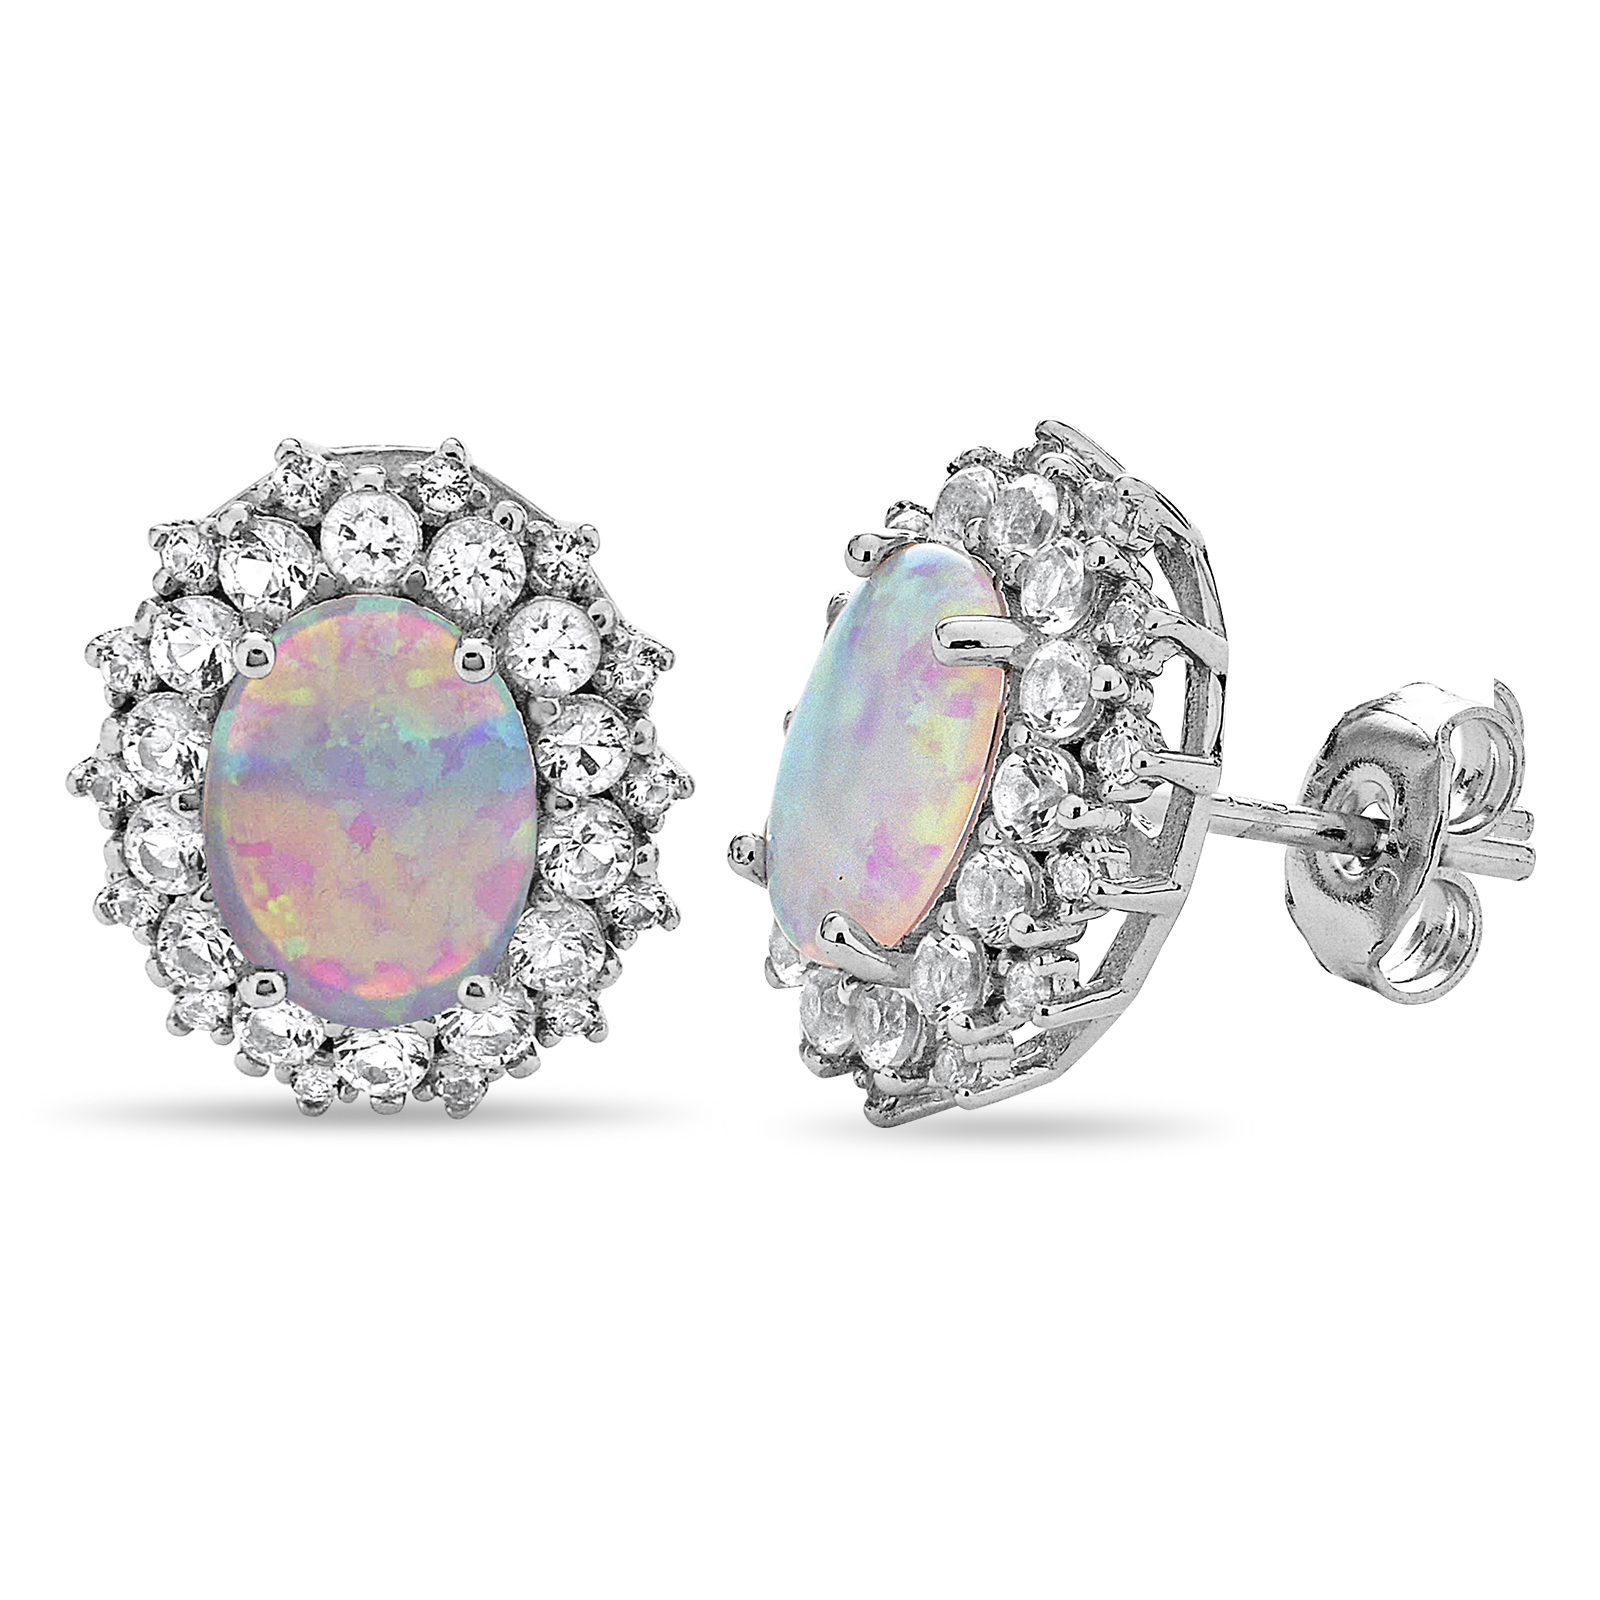 Sterling Silver Halo 9x7 Oval Created Opal and White Topaz Stud Earrings